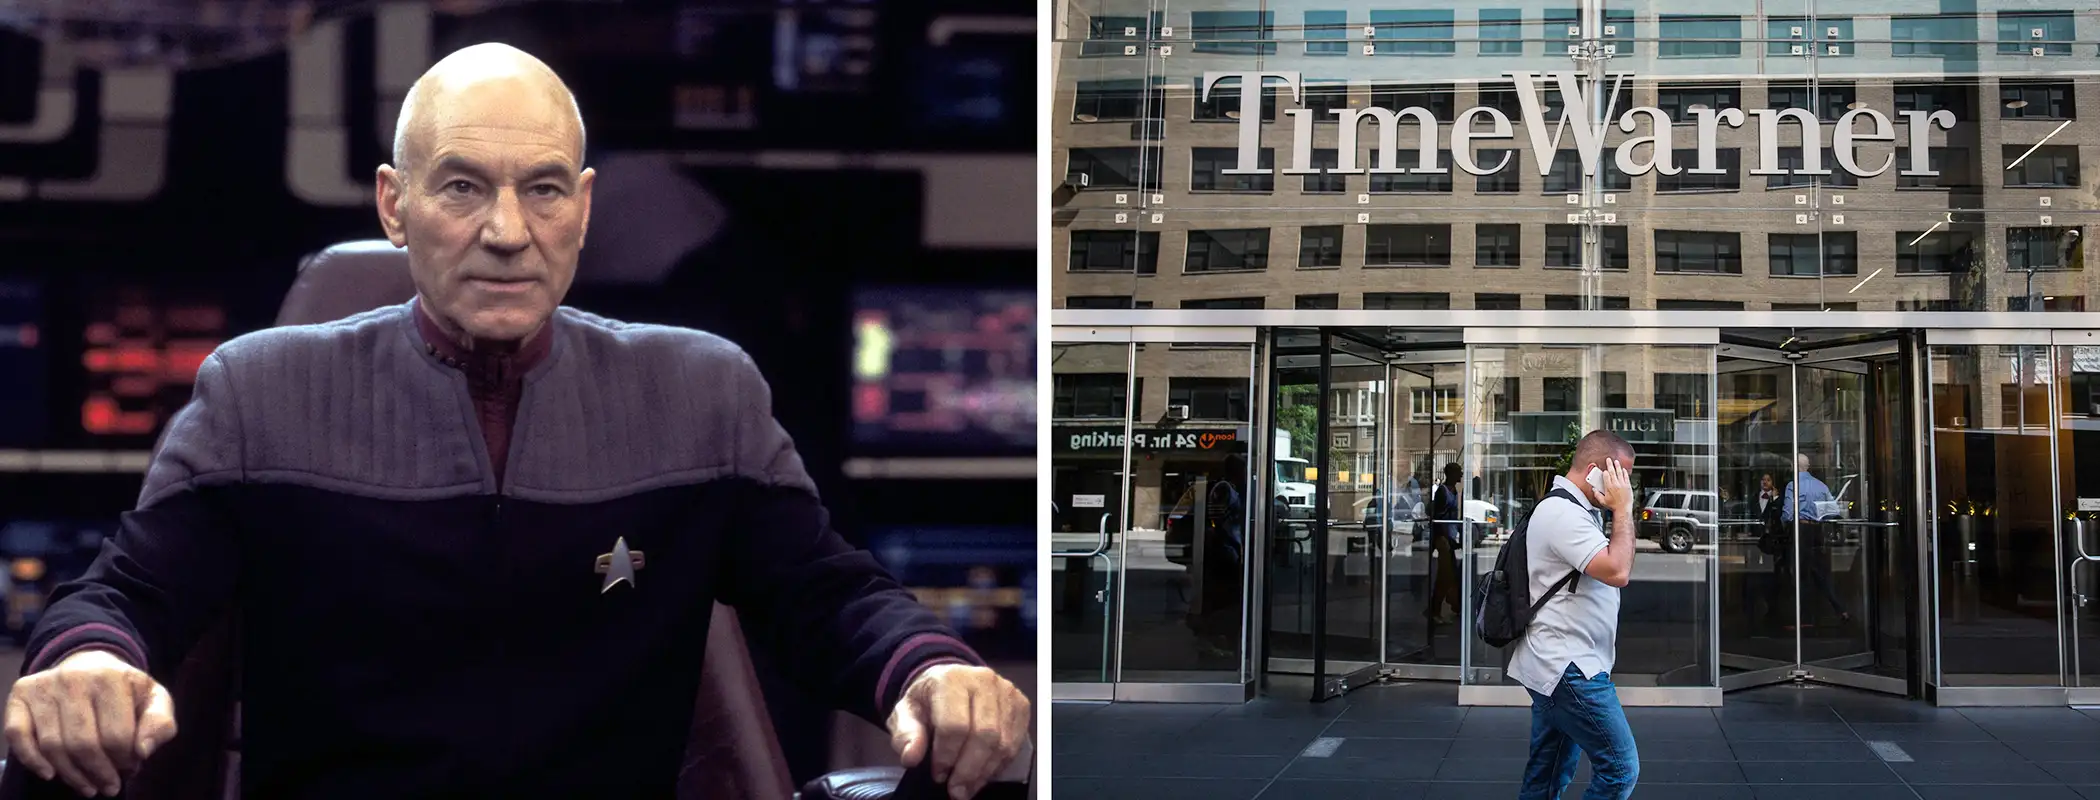 Patrick Stewart in Star Trek and Time Warner Cable exterior